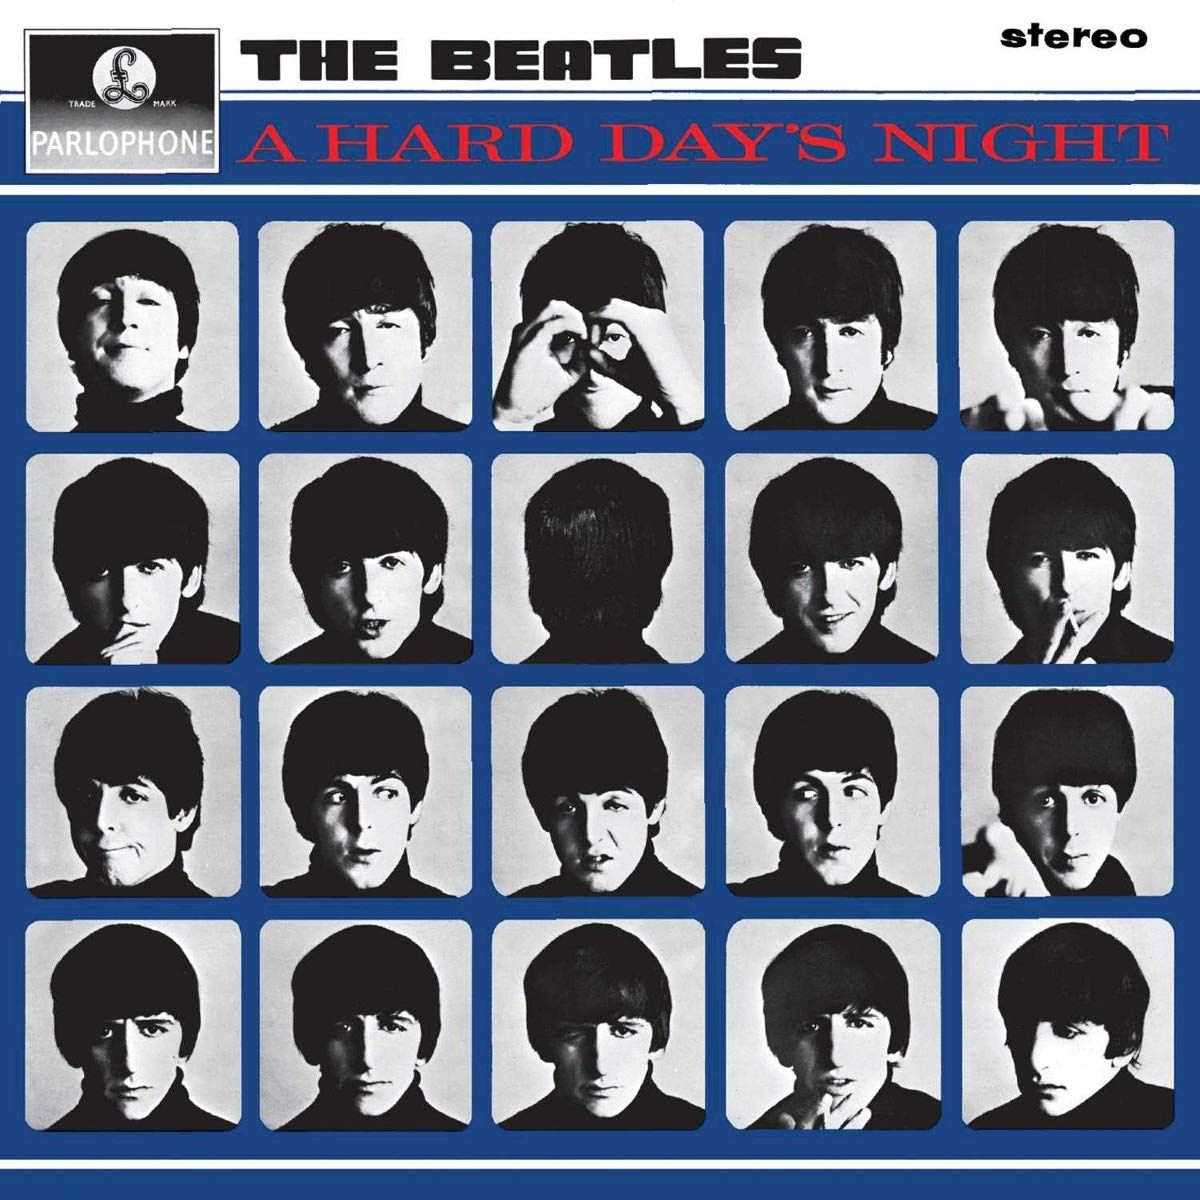 The Beatles - A Hard Day's Night LP (180g, Remastered)